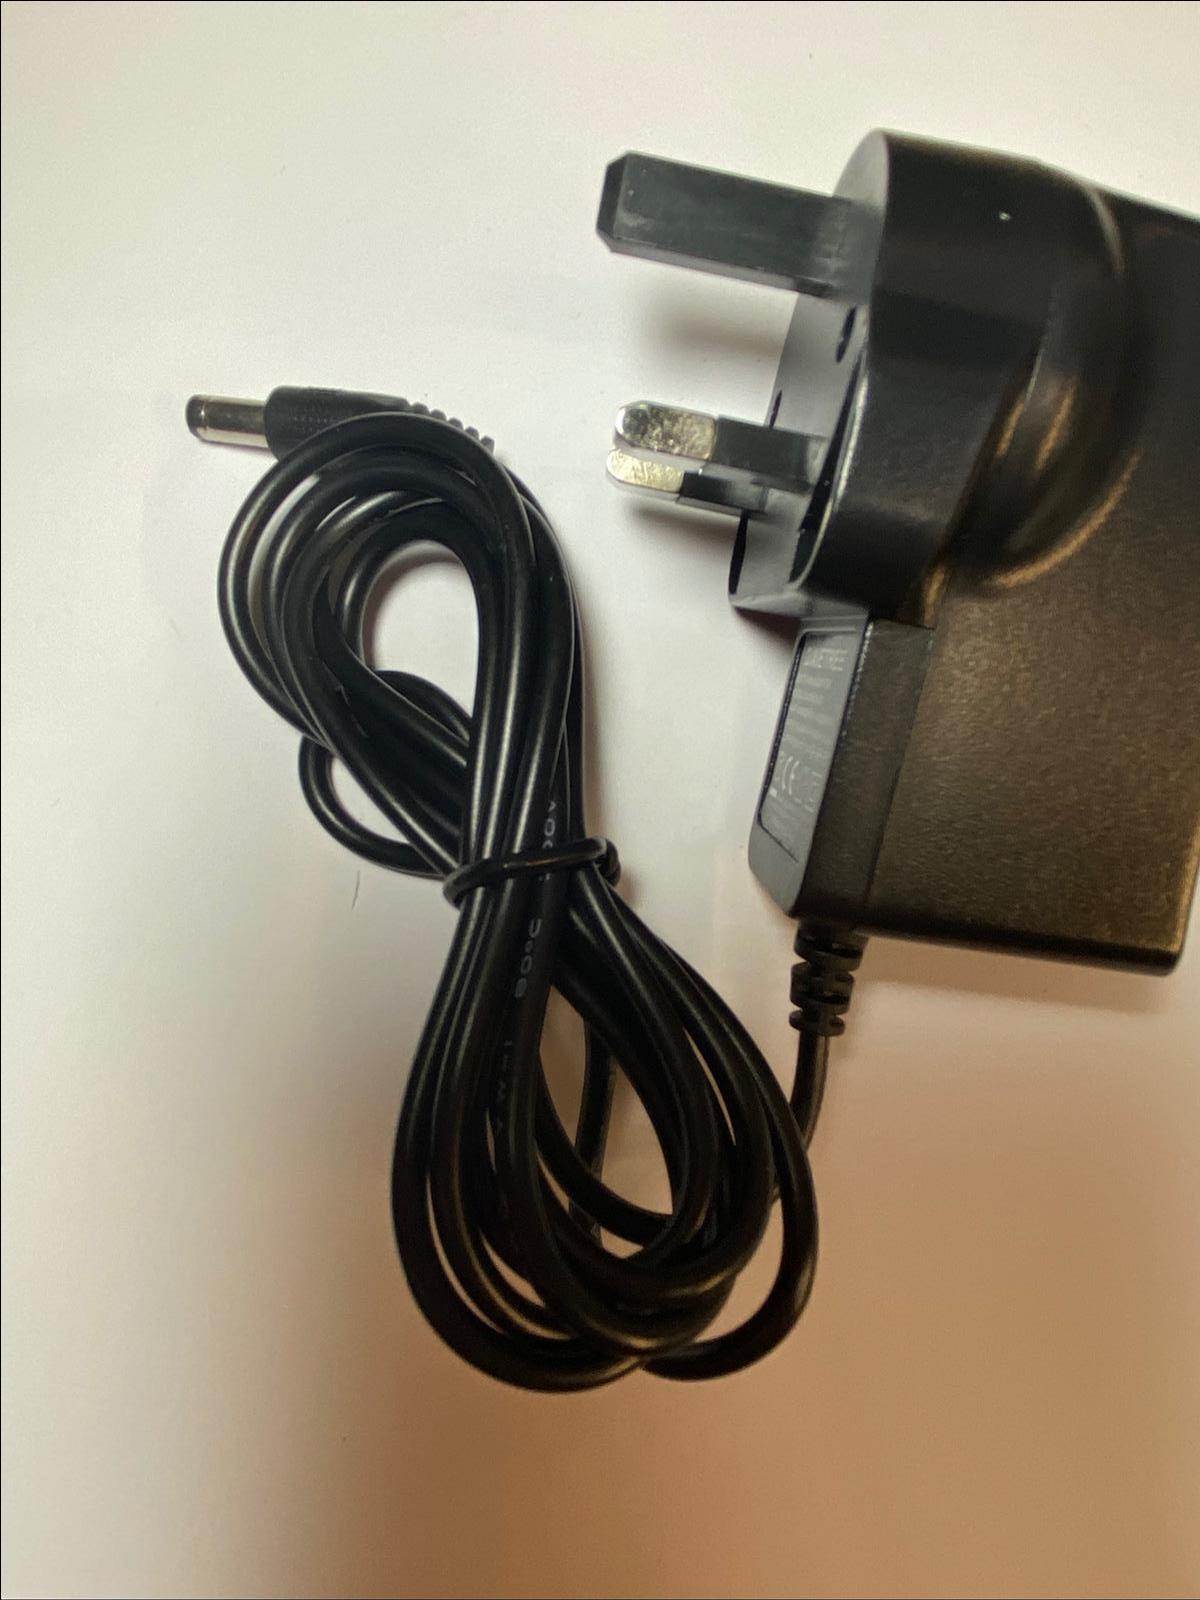 9V Switching Adapter for Brother P-Touch 1005, 1010, 1080, 1090 Label Printer Type: Power Adapter Max. Output Power: - Click Image to Close